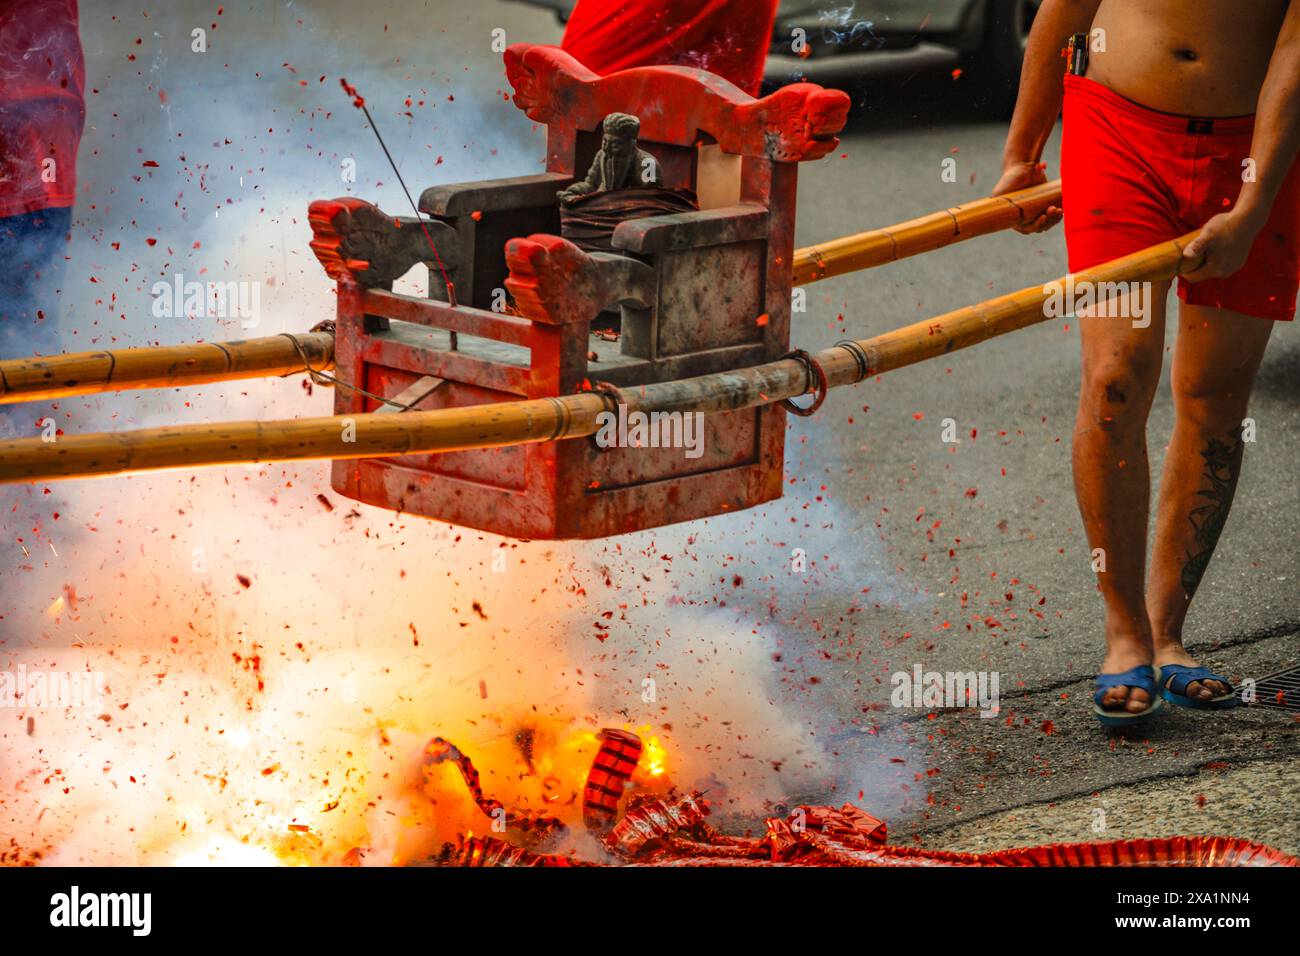 A man extinguishing a flaming hydrant with a hydraulic tool Stock Photo